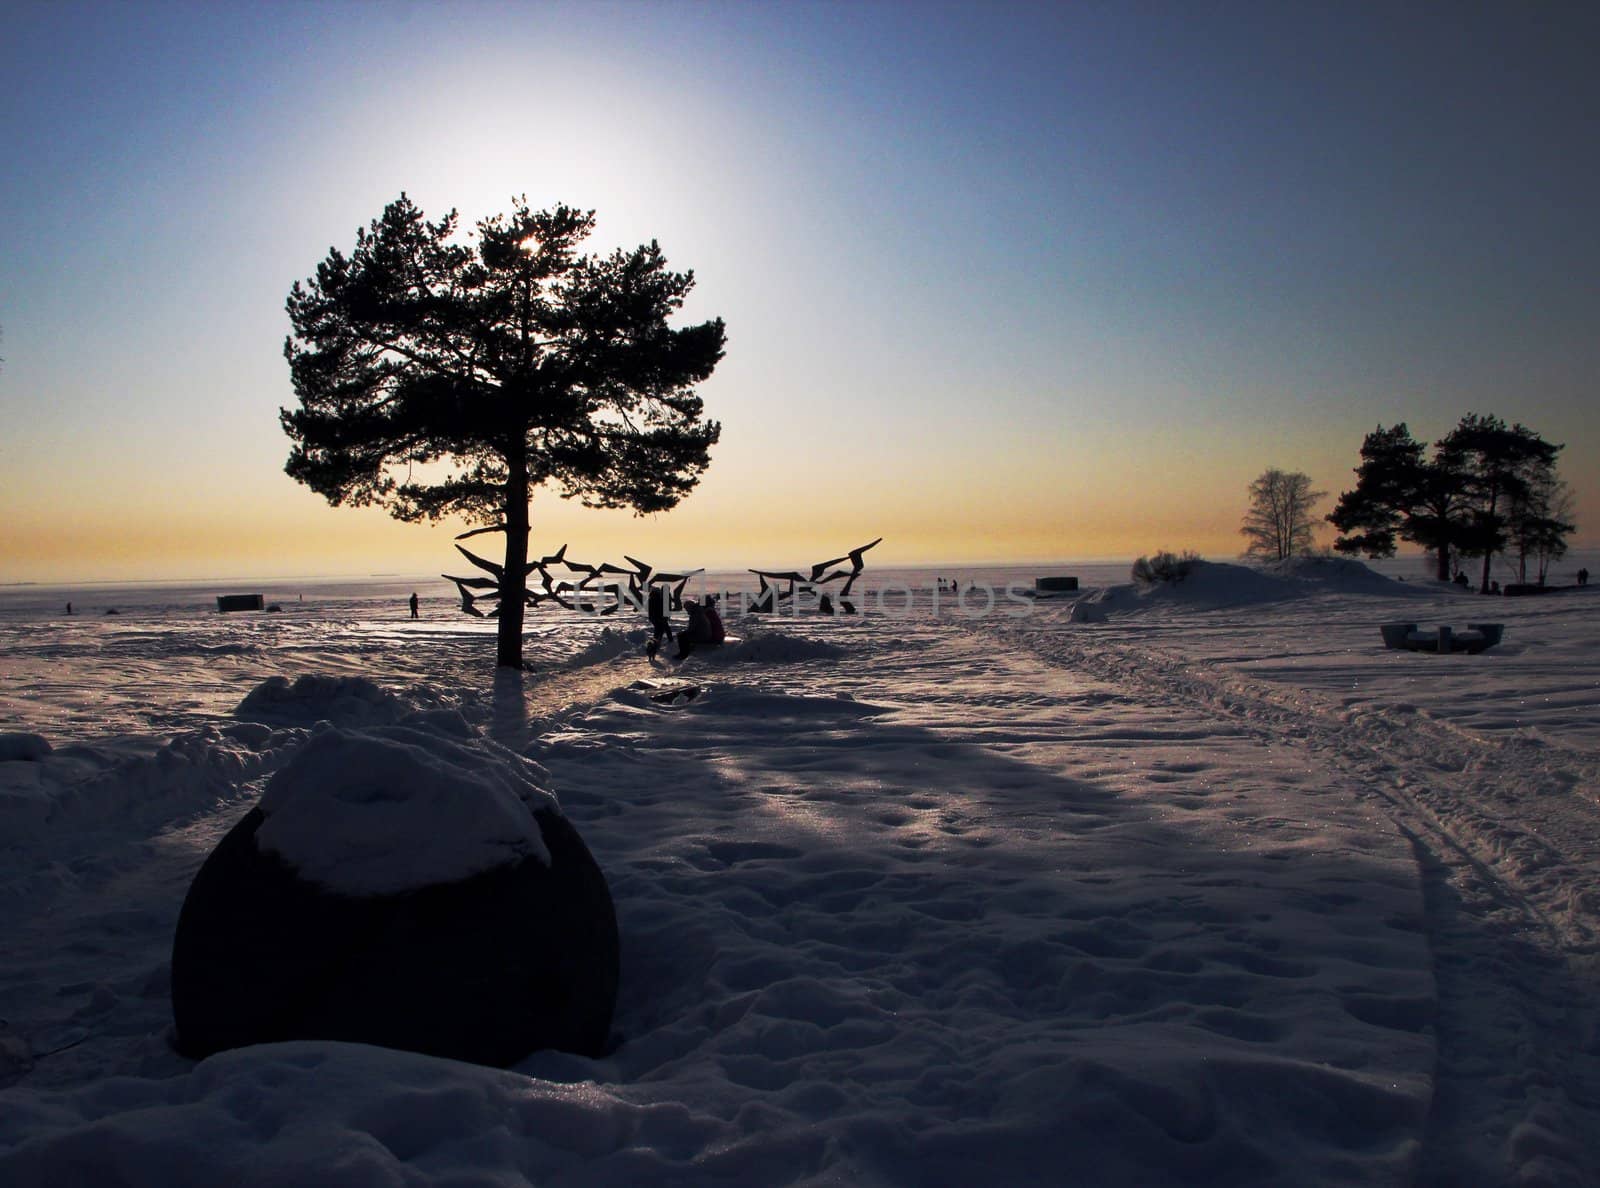 Winter landscape of a beach. One tree in the center. A lot of snow/